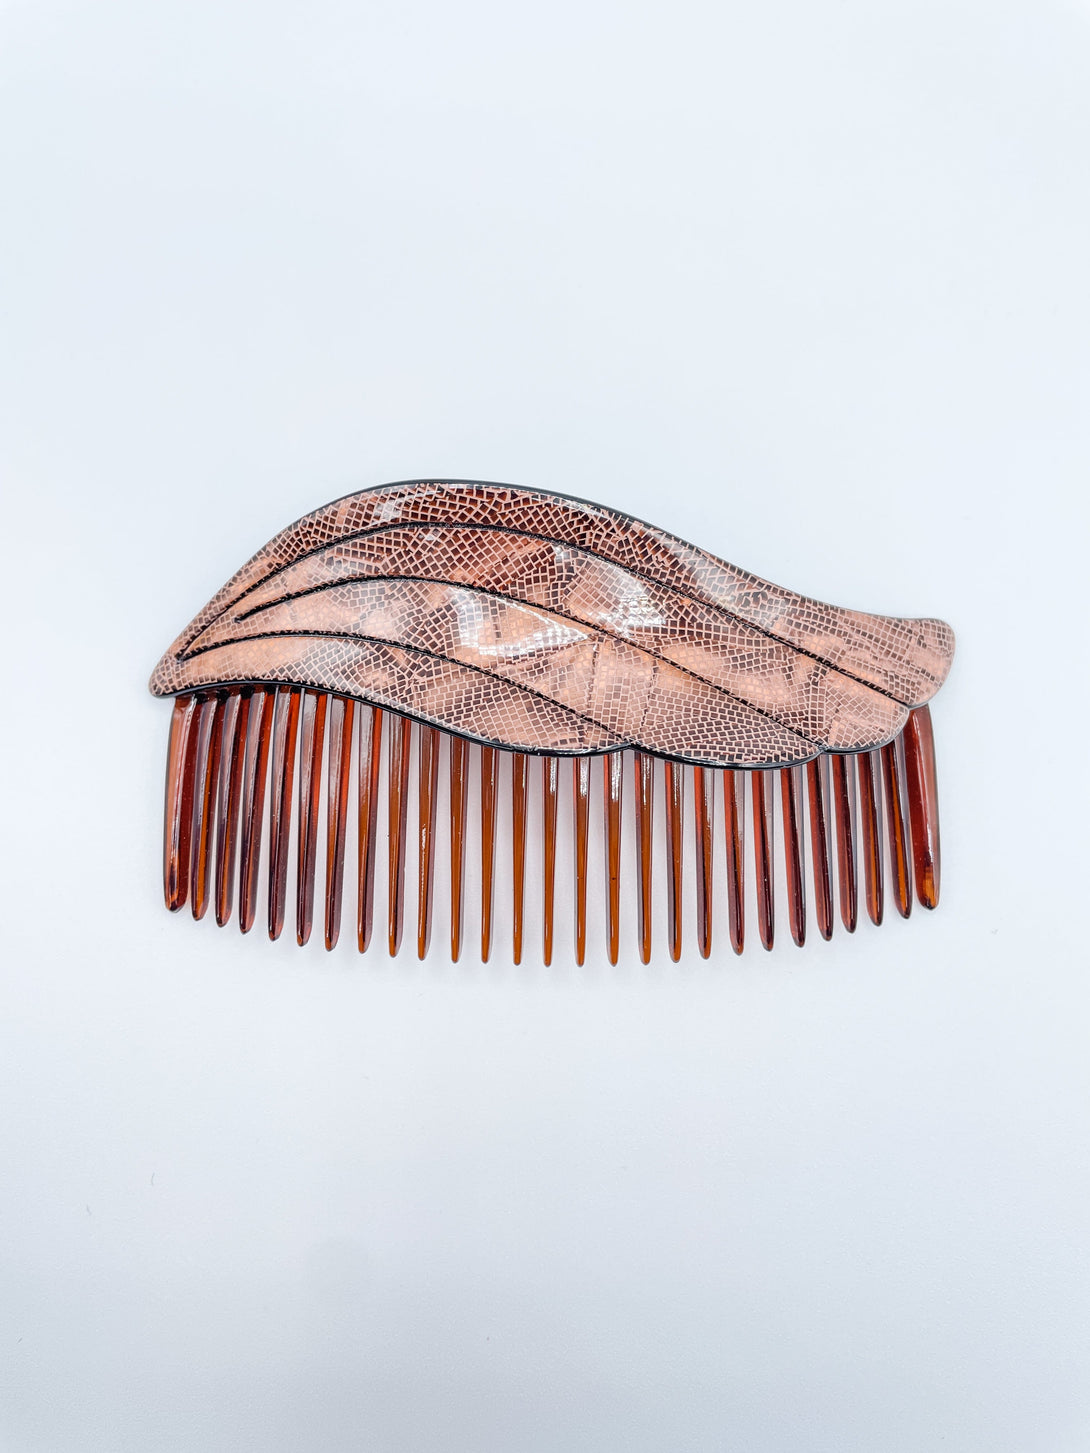 Large Vintage French Mosaic Wave Acrylic Women's Hair Comb